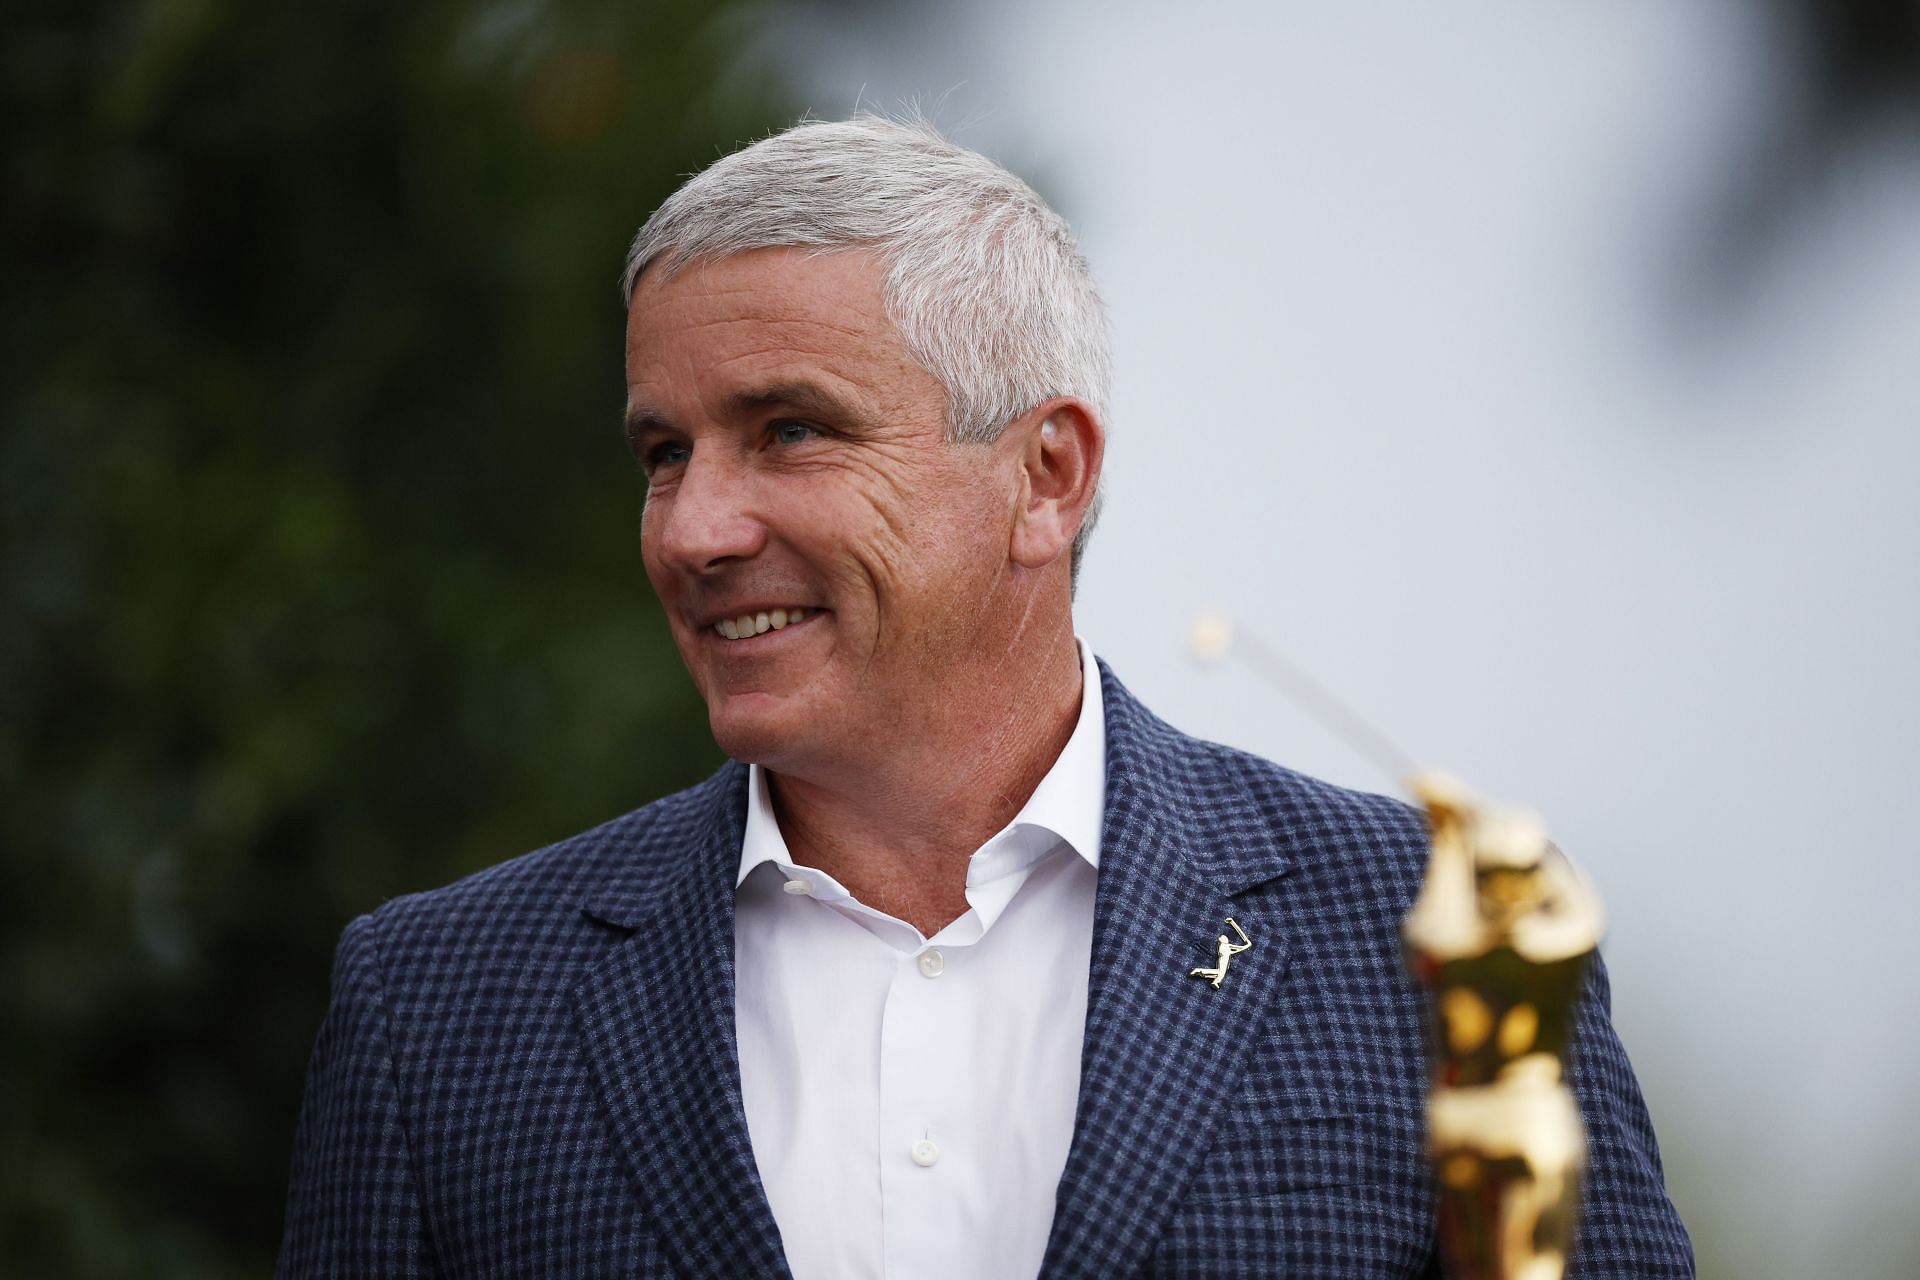 Jay Monahan, PGA Tour Commissioner, during the Players Championship